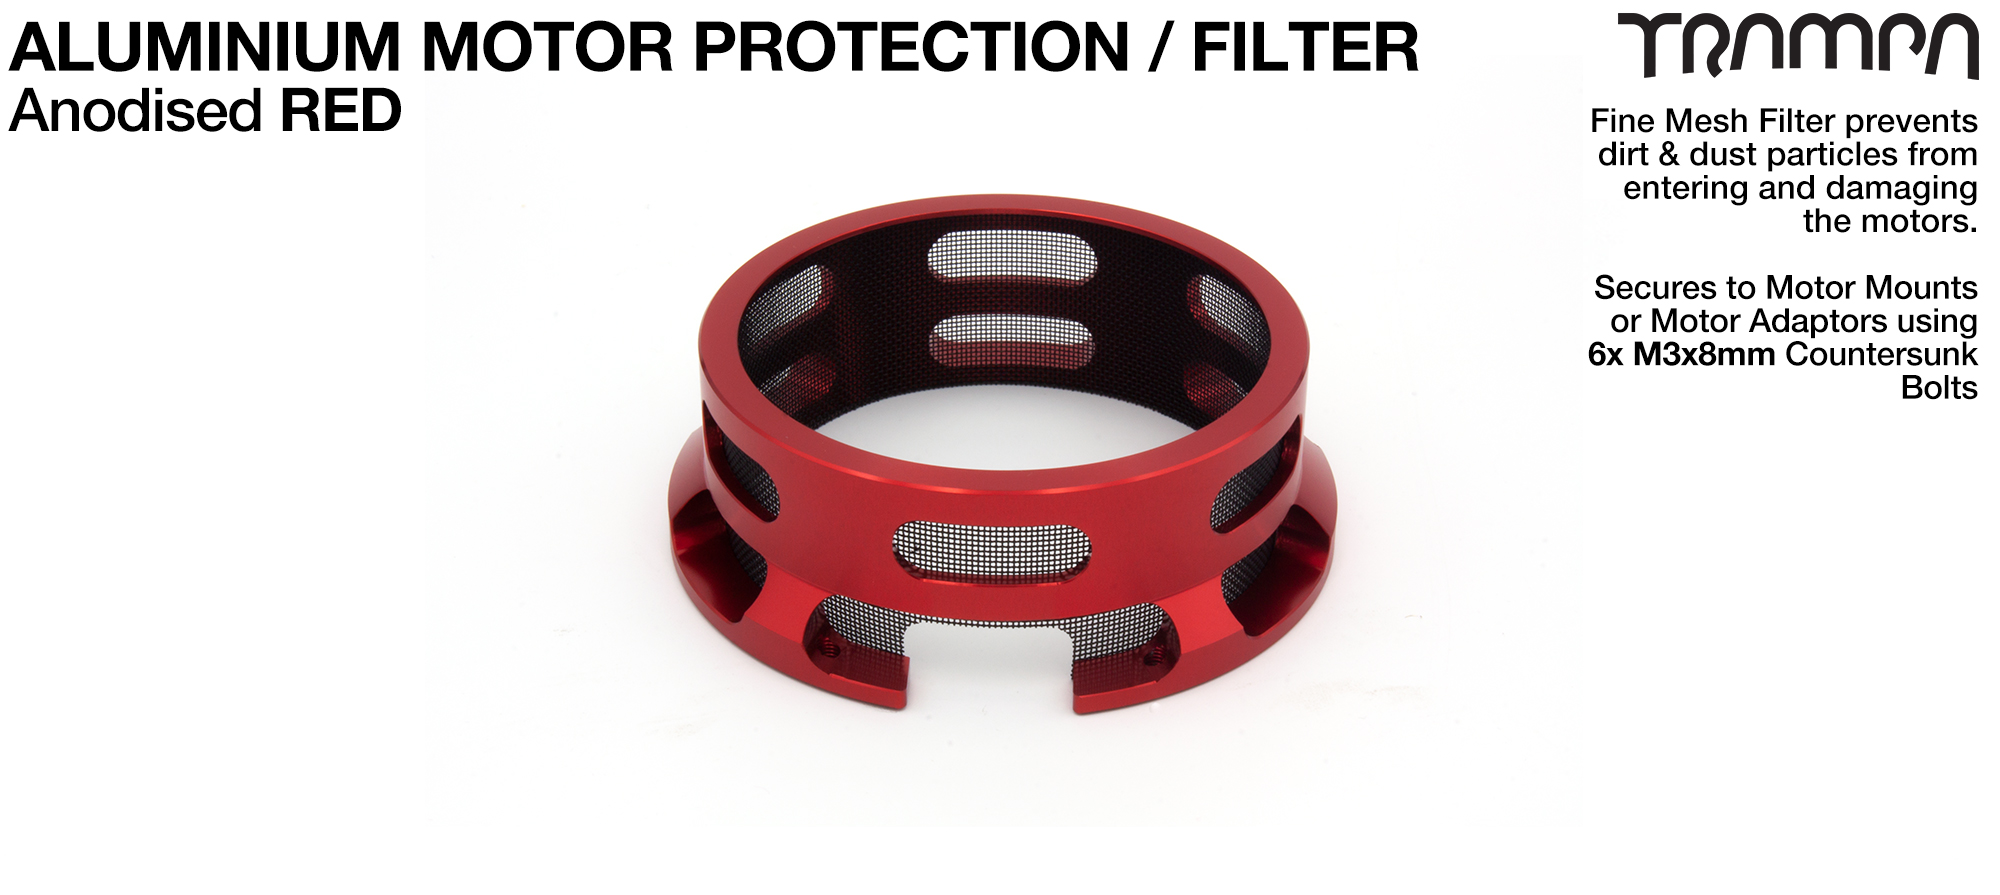 HALF CAGE Motor protection Housing - RED 